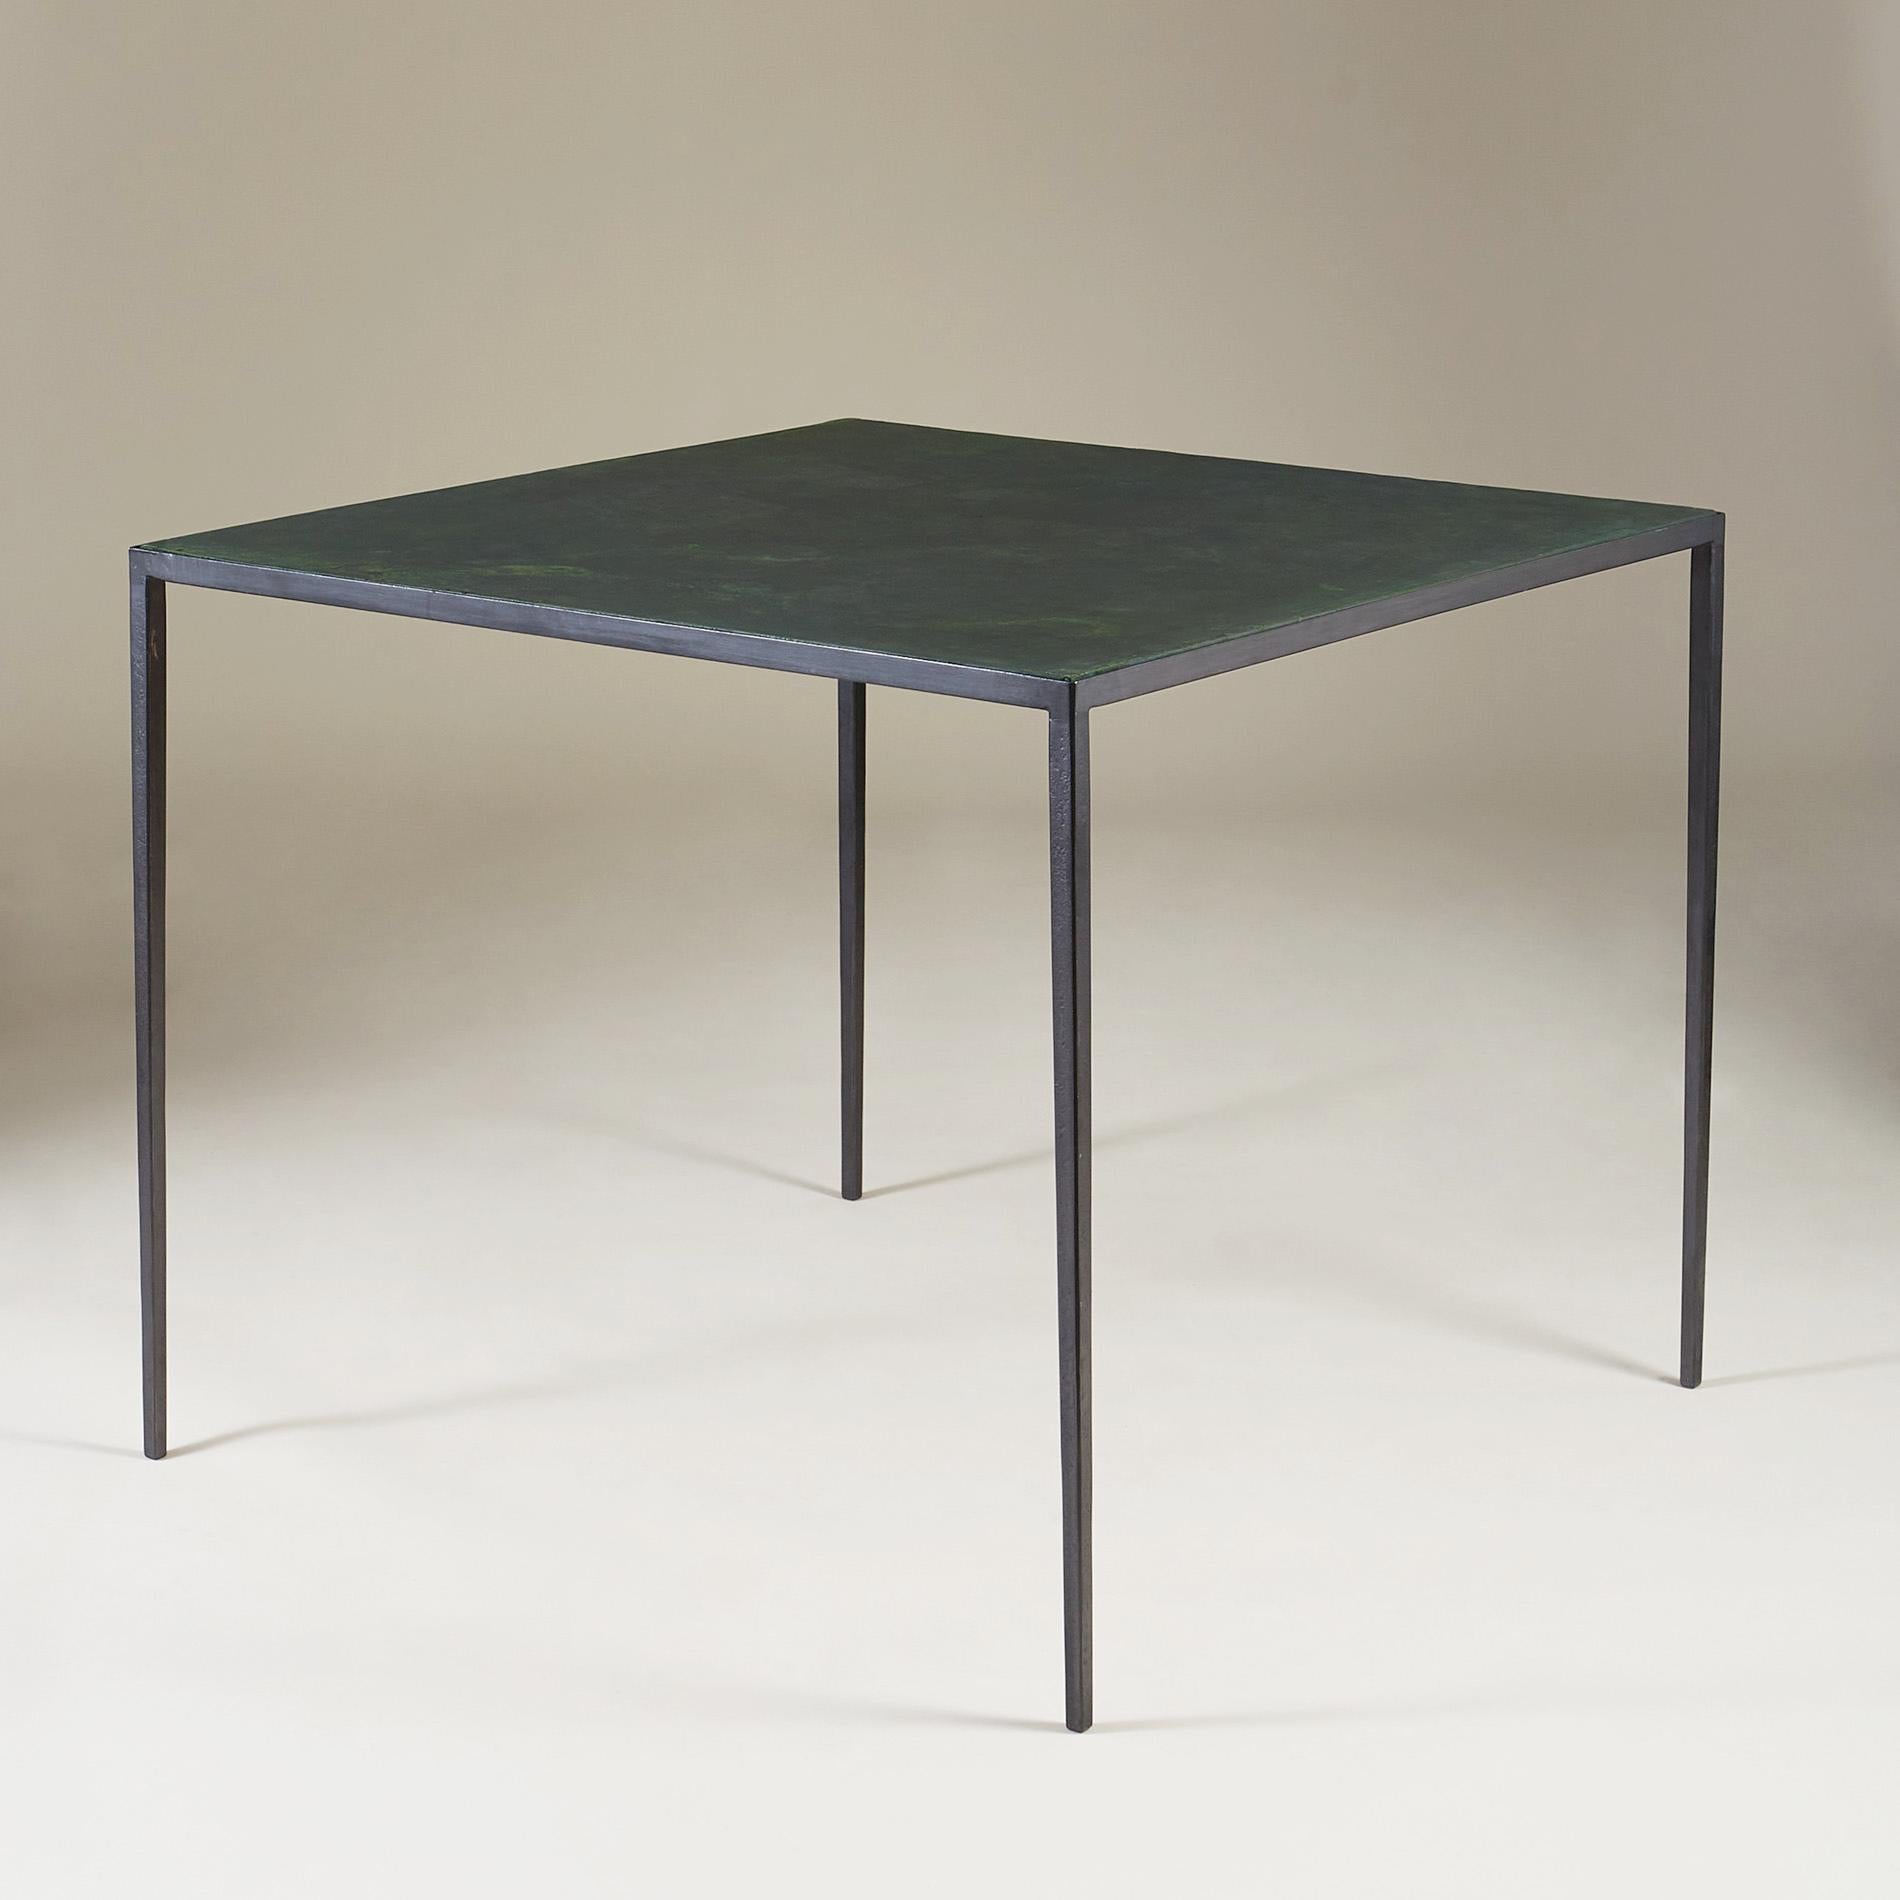 A games table of exceptional quality, demonstrating exactly the designer's mastery of perfectly balanced Minimalist lines. A perfect example of why Jean-Michel Frank is internationally known as the master of minimalism. The table has patinated iron